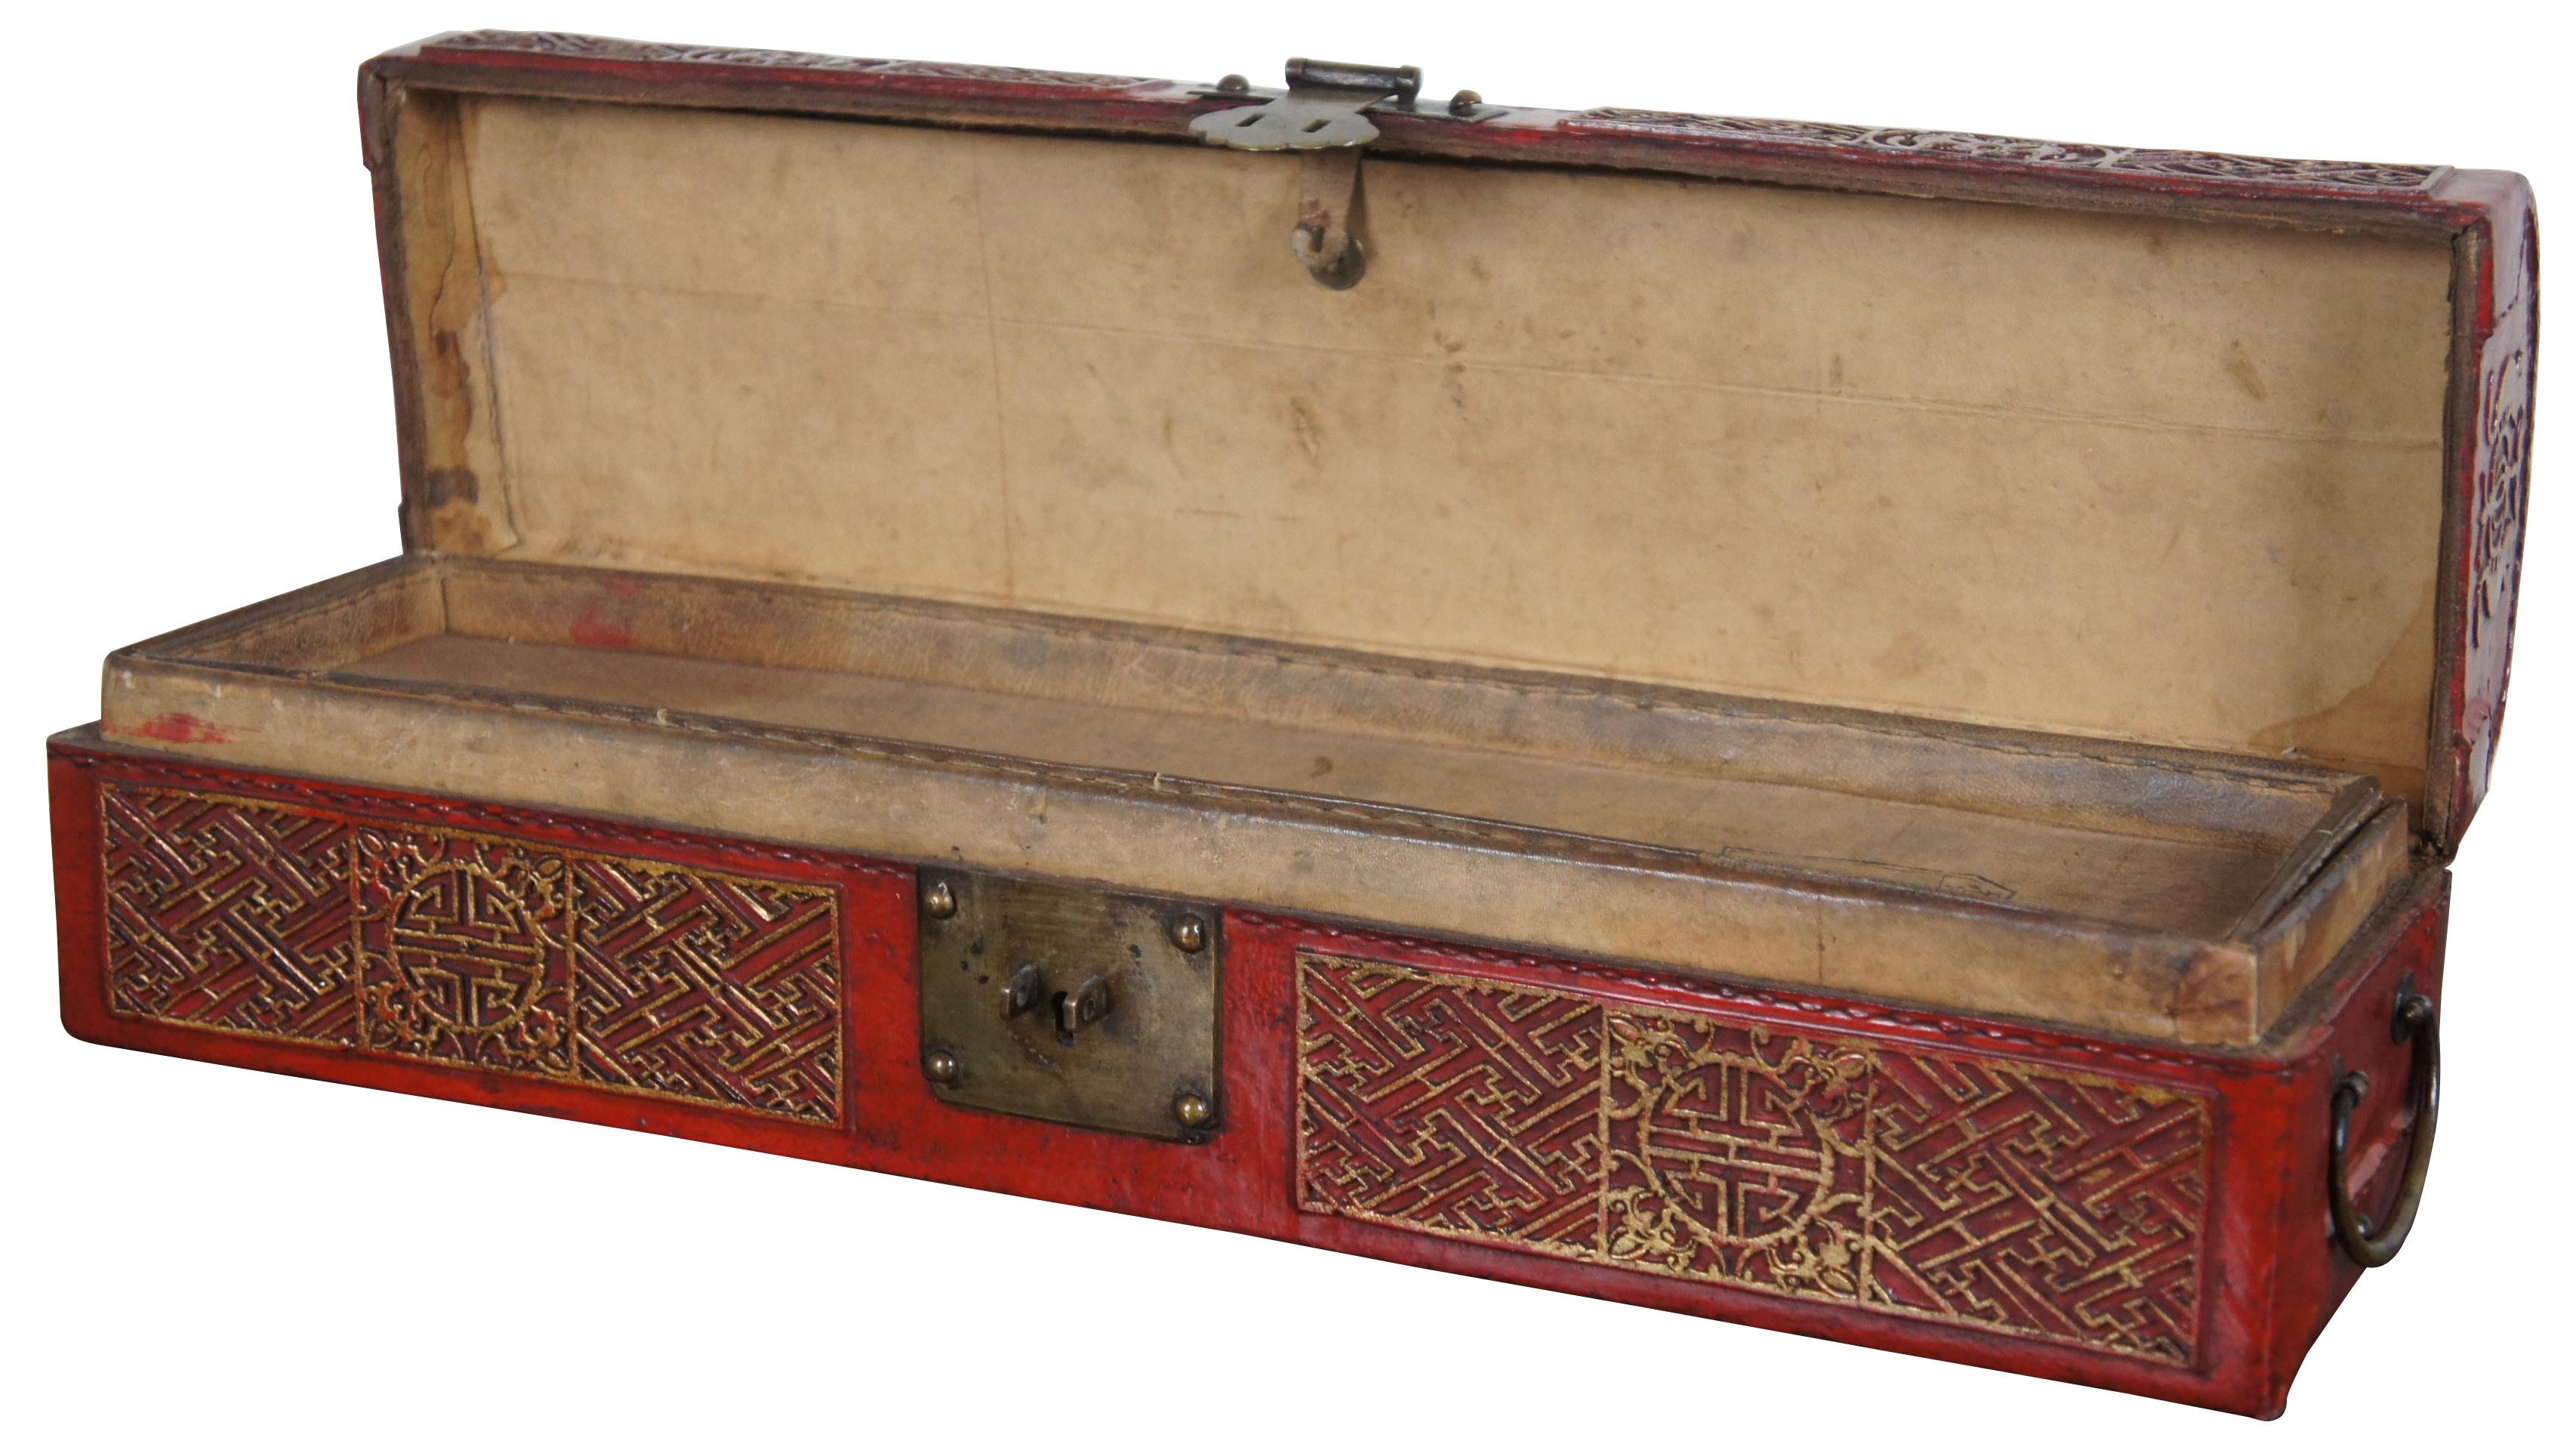 Antique red leather and lacquer Chinese scroll box with gold designs, domed lid, interior tray and brass handles / hardware.
 